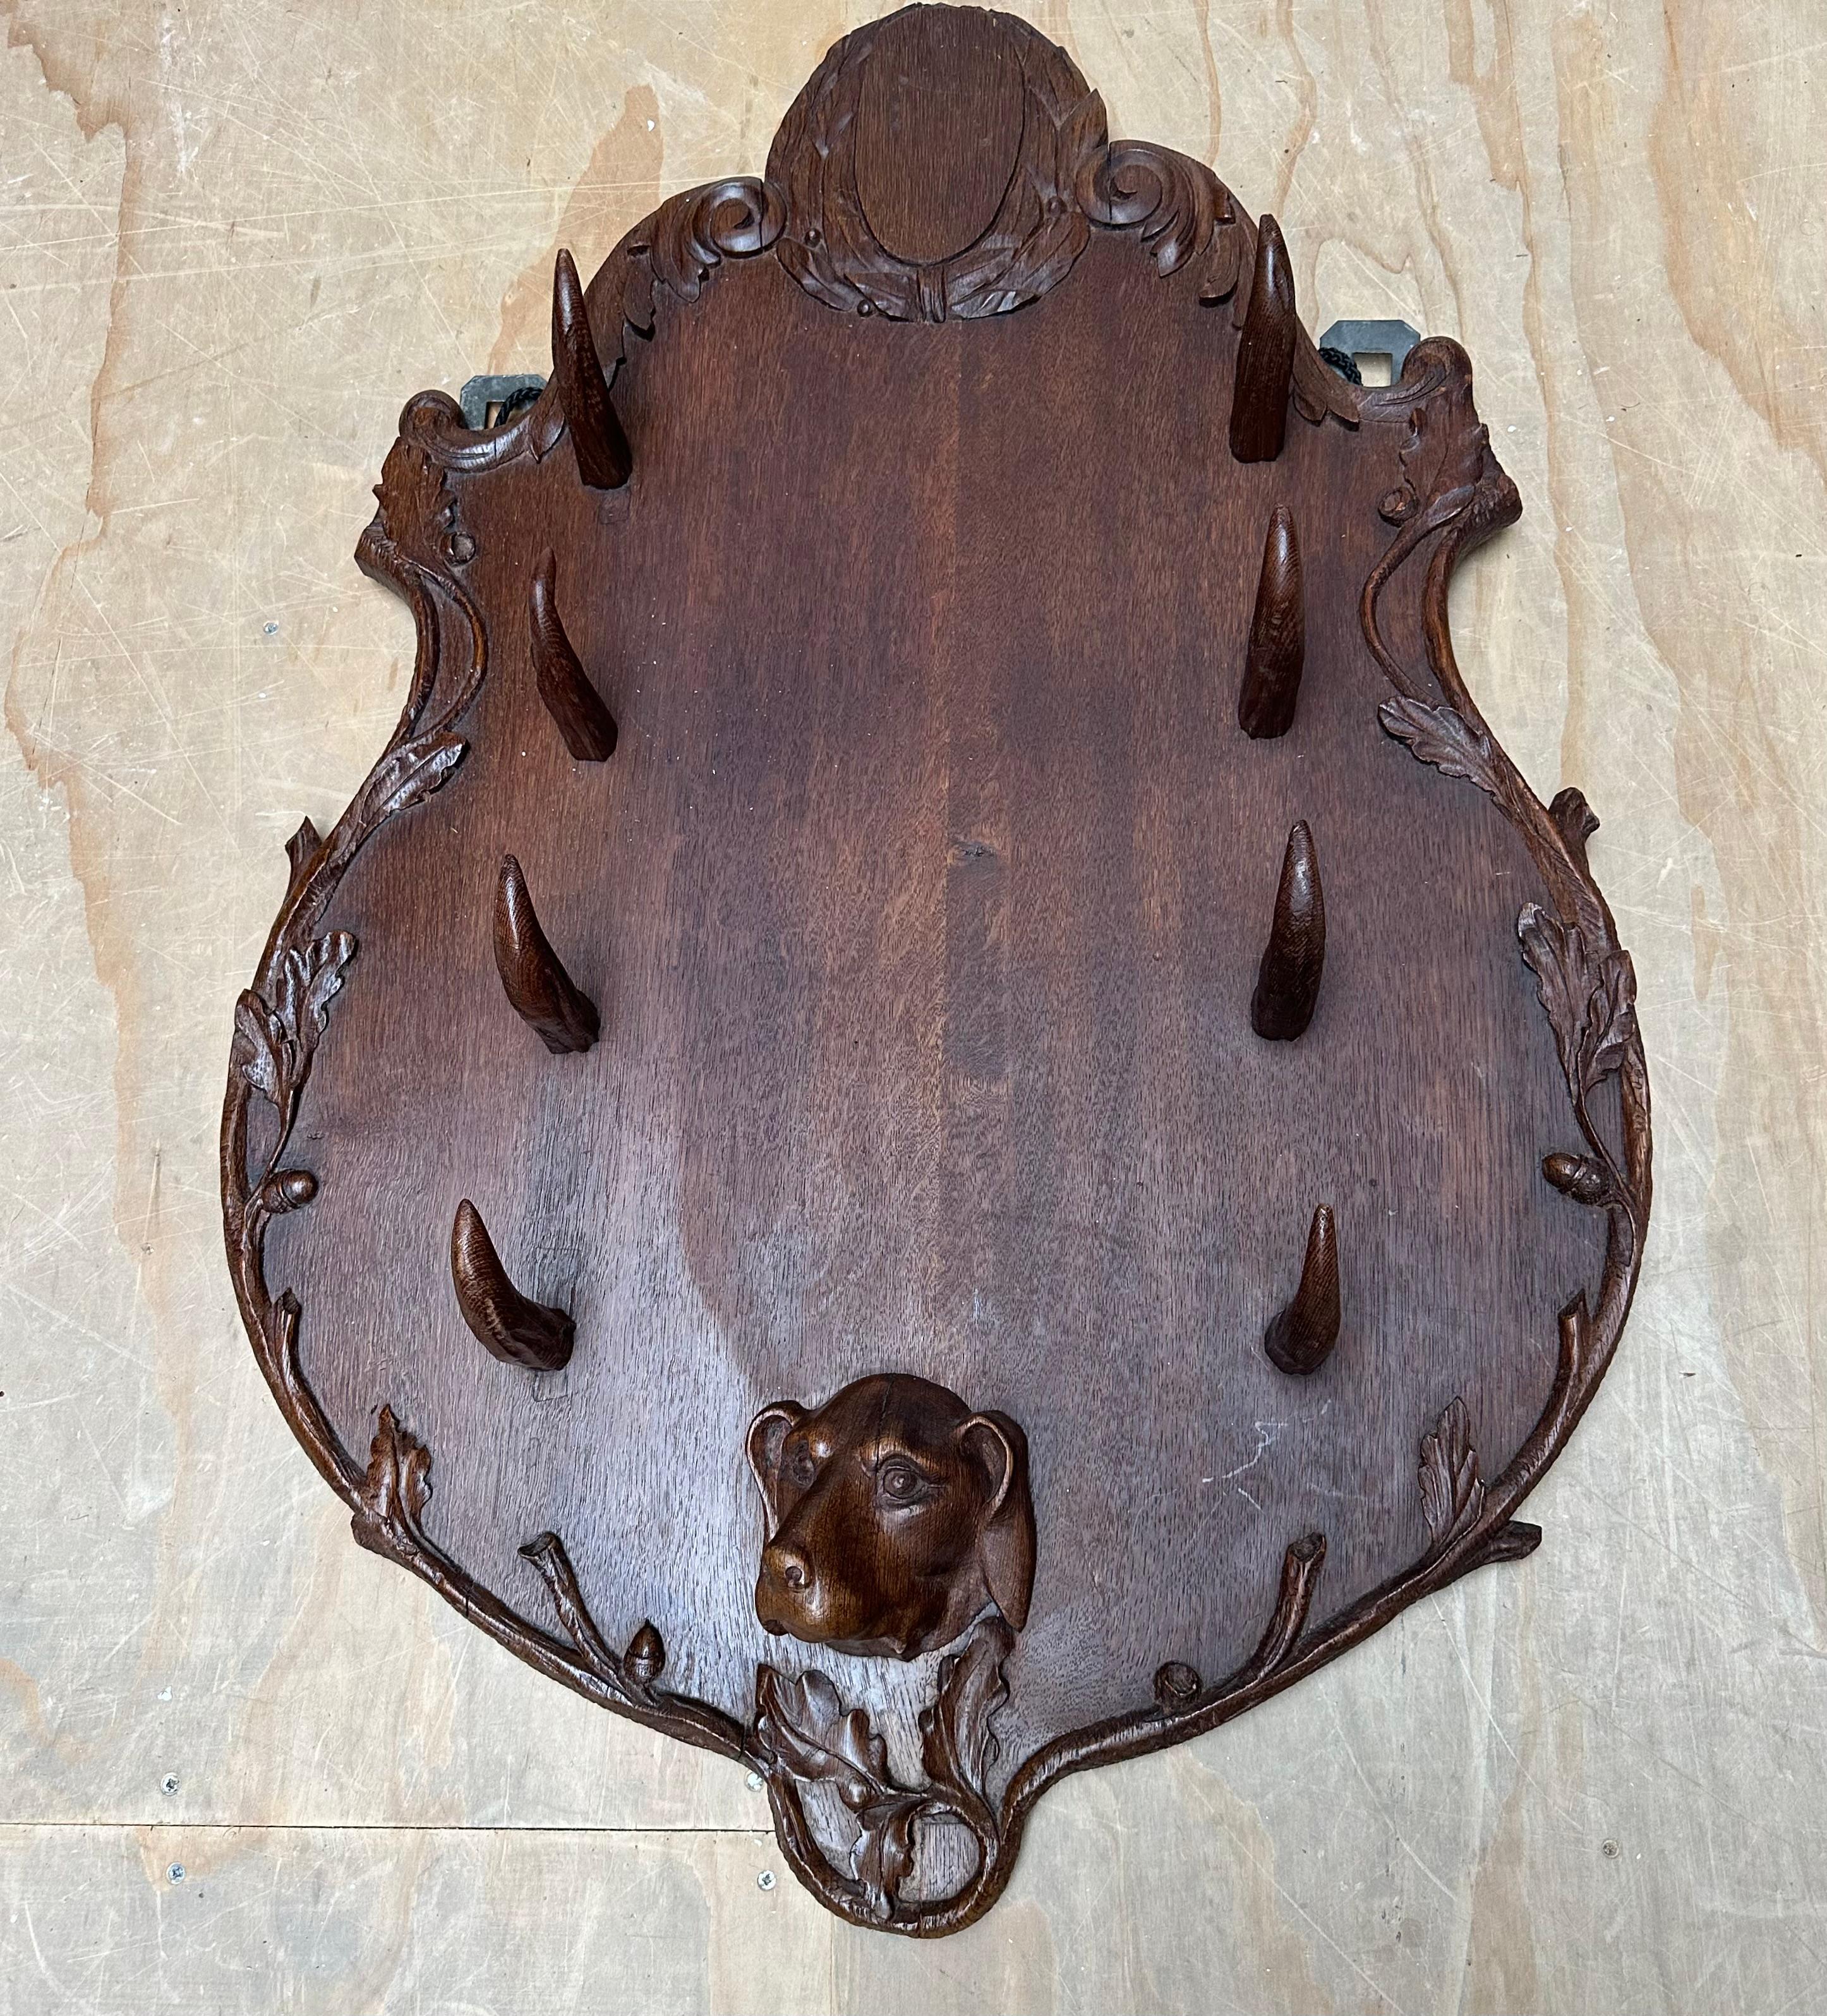 Unique and large hand carved oakwood rifle rack with stunning carved wooden hunting dog.

This highly decorative and very good condition gun rack for wall mounting could look great above your fireplace, but also in a private library, man cave, home